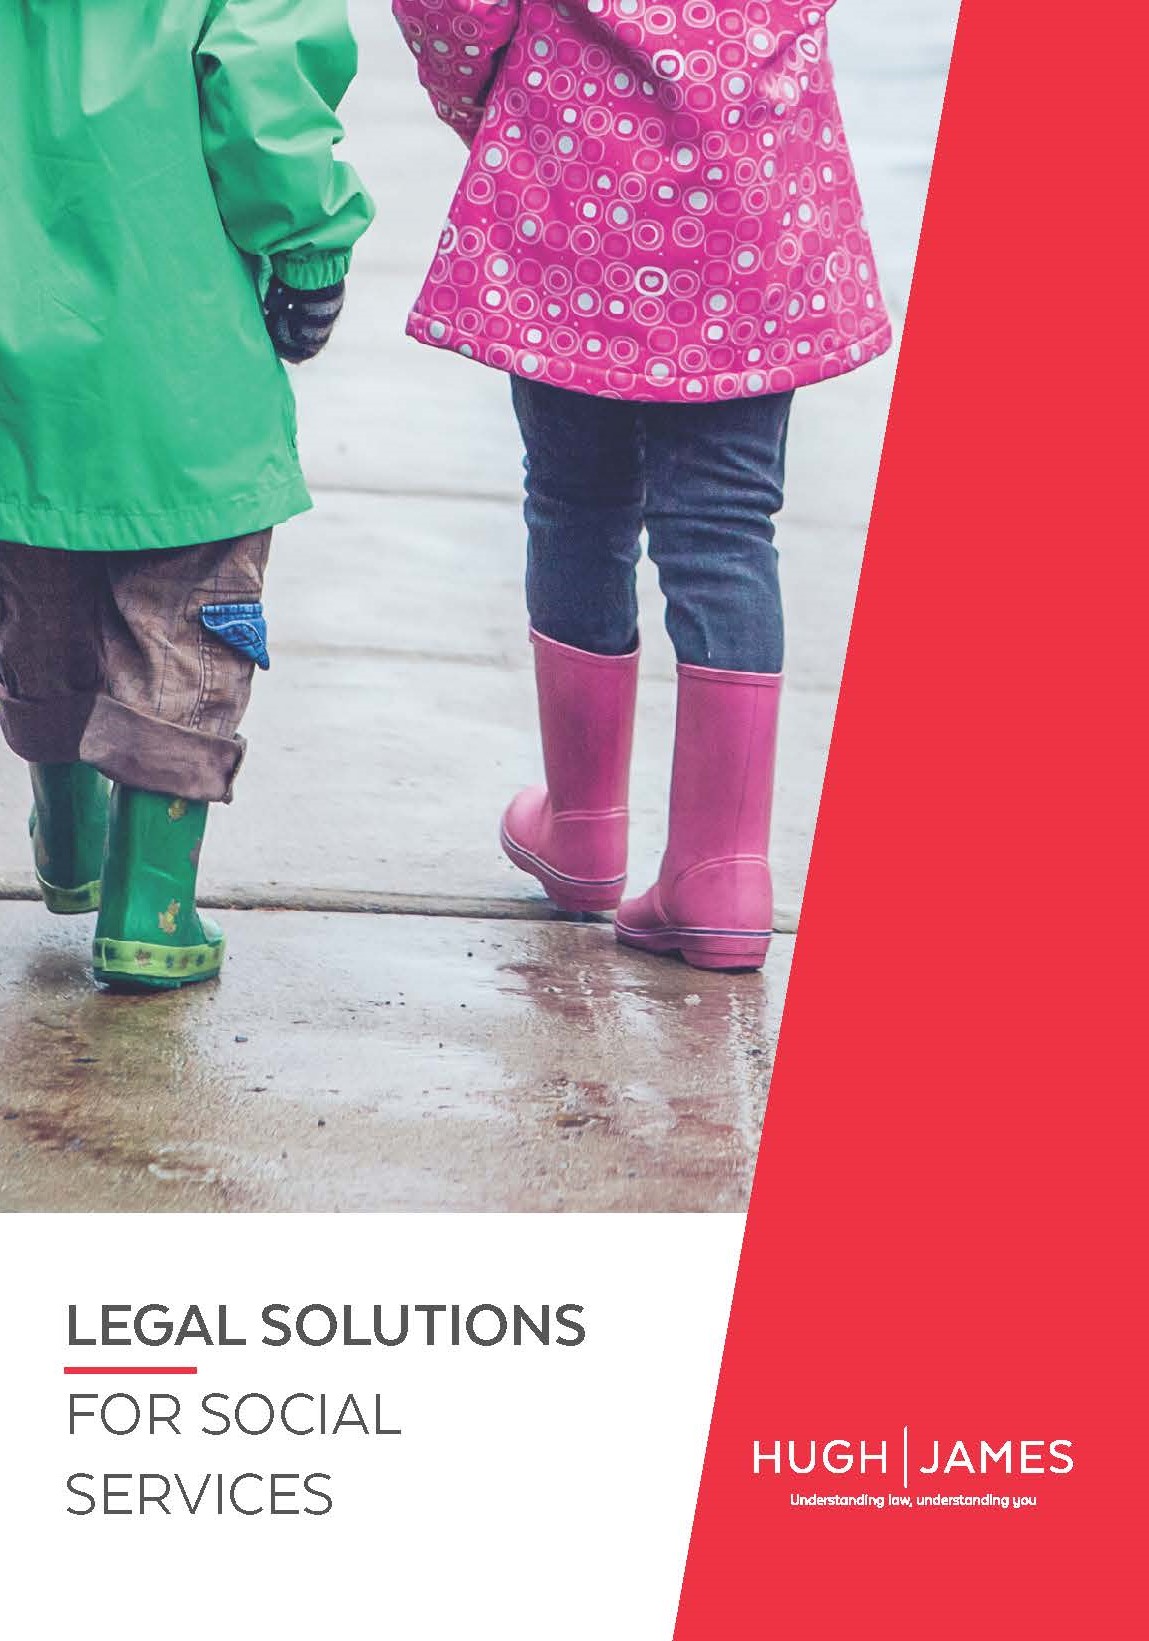 Legal Solutions for Social Services Brochure